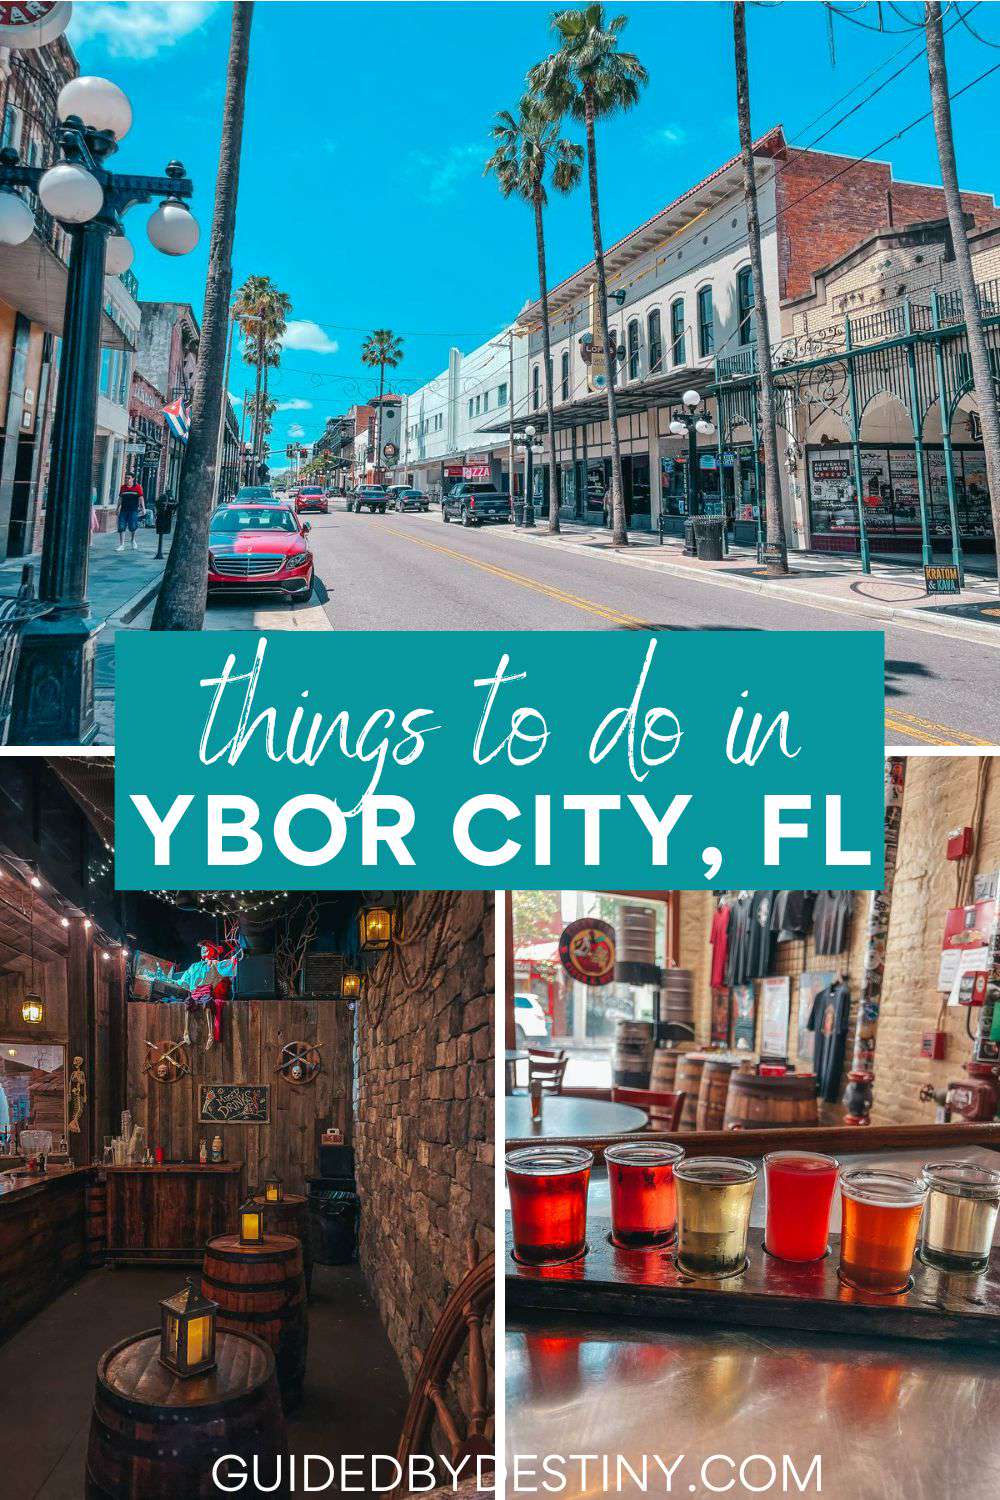 Things to do in Ybor City, Florida